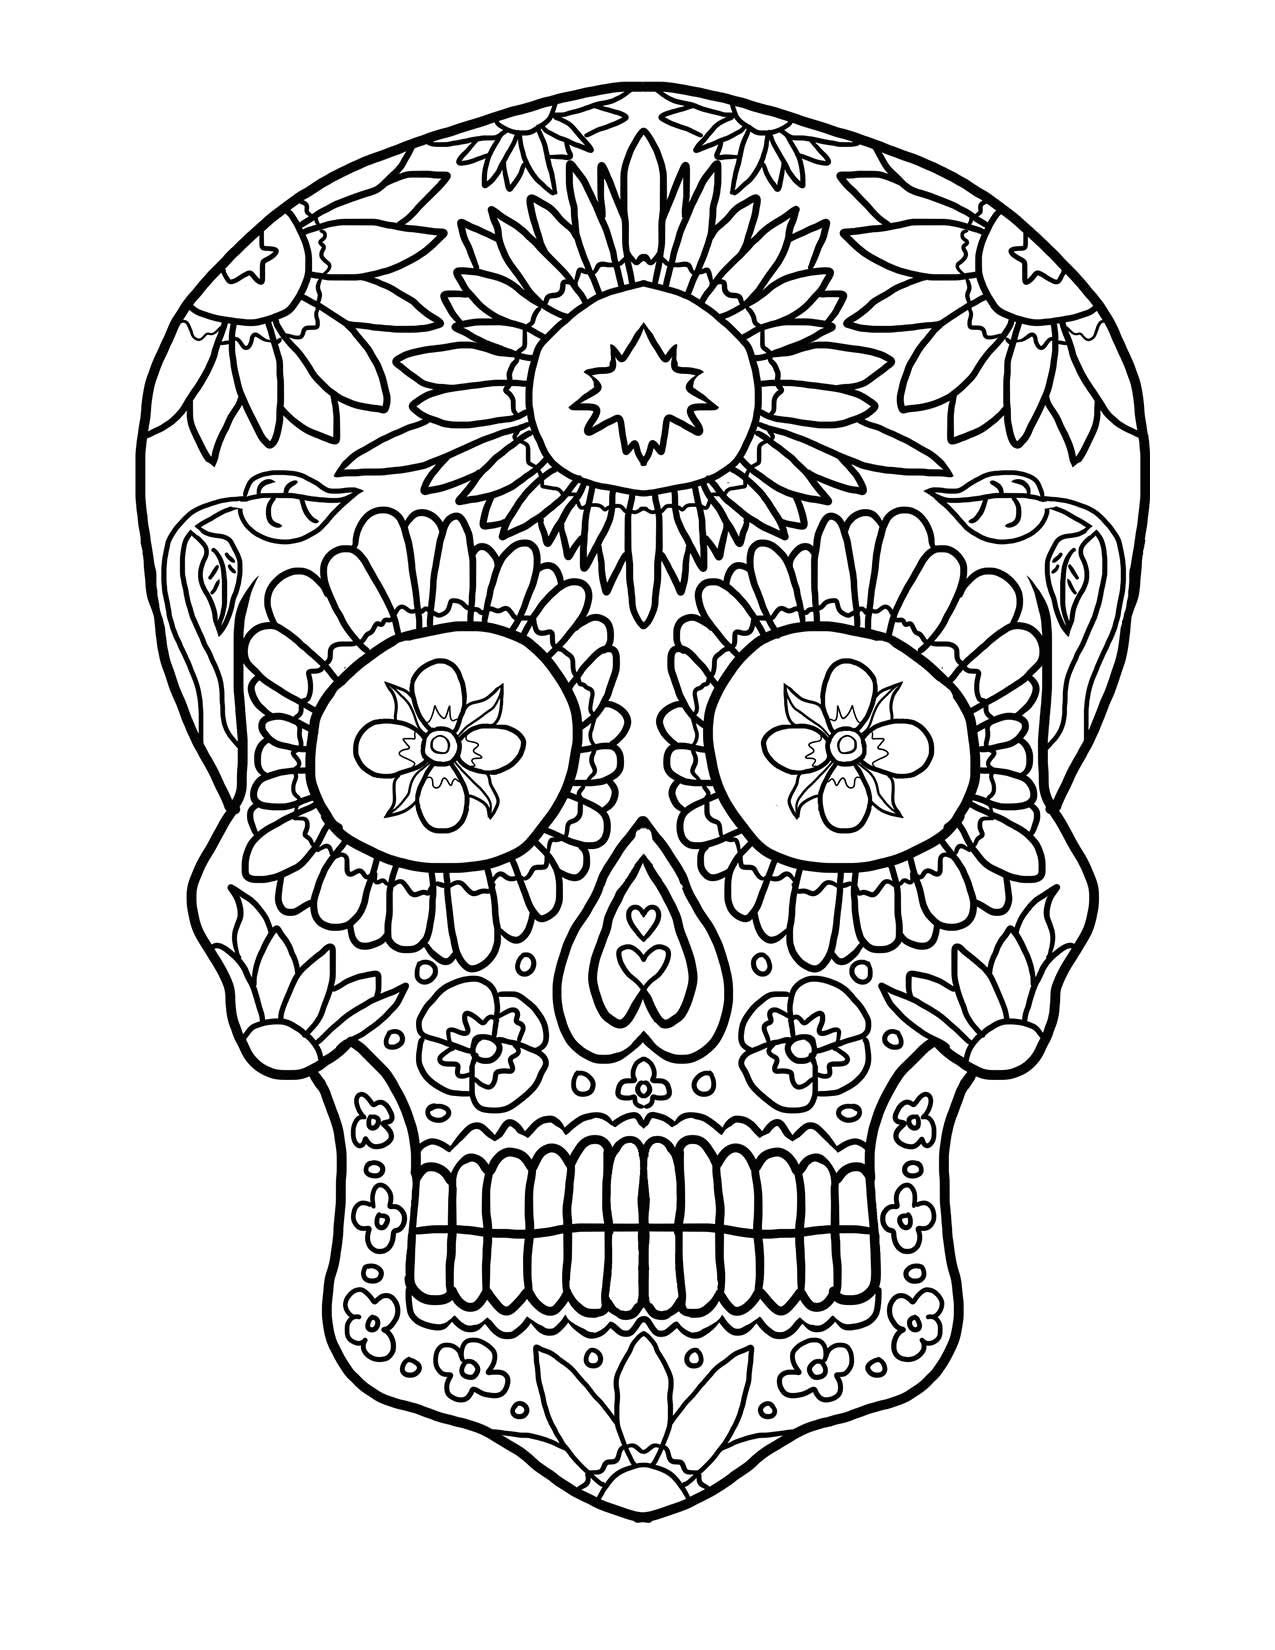 Day Of The Dead Coloring Pages For Adults at GetDrawings | Free download